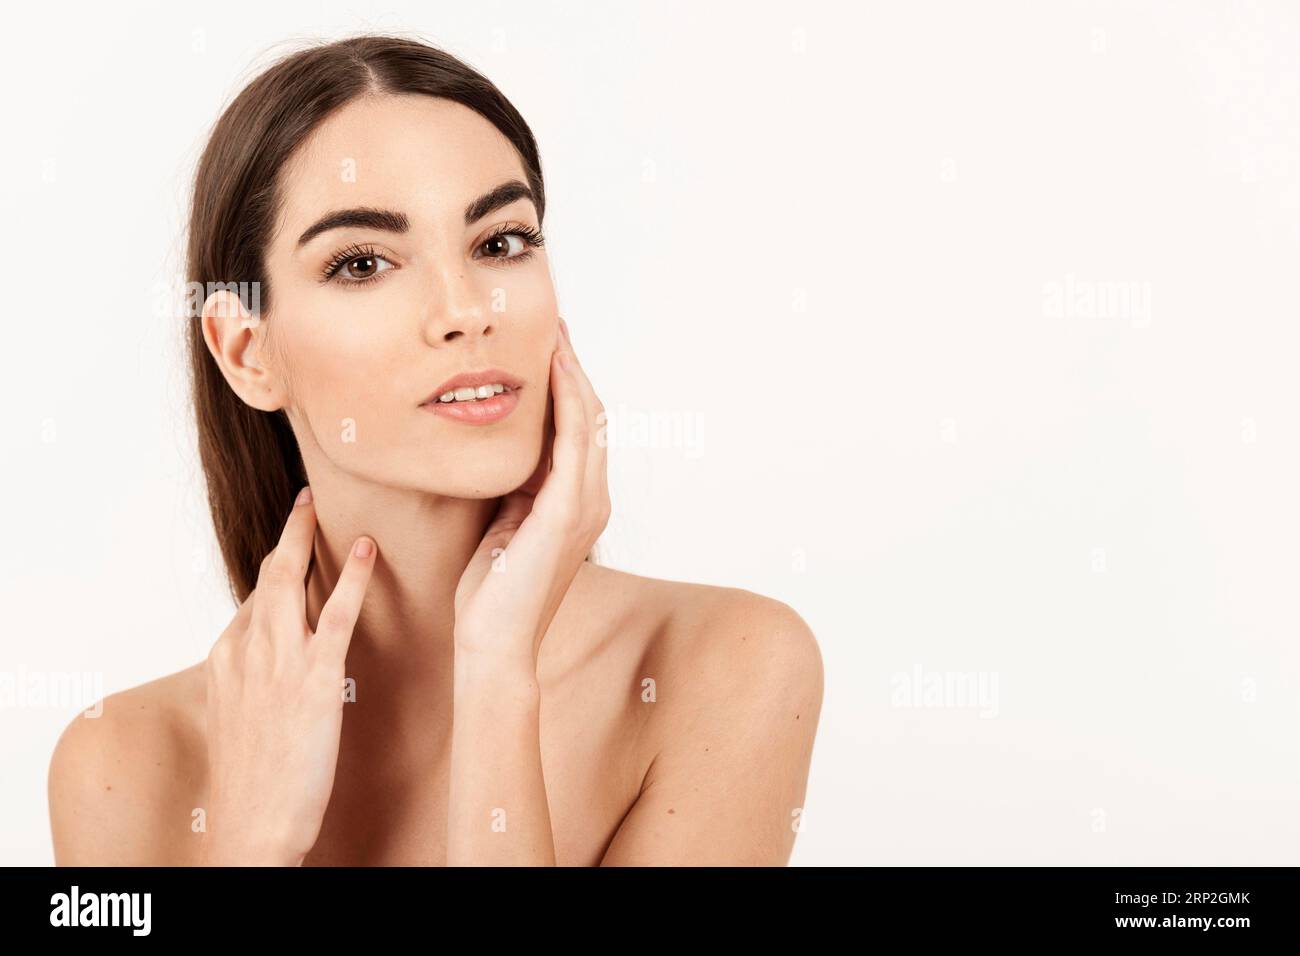 Model with perfect face after beauty treatment Stock Photo